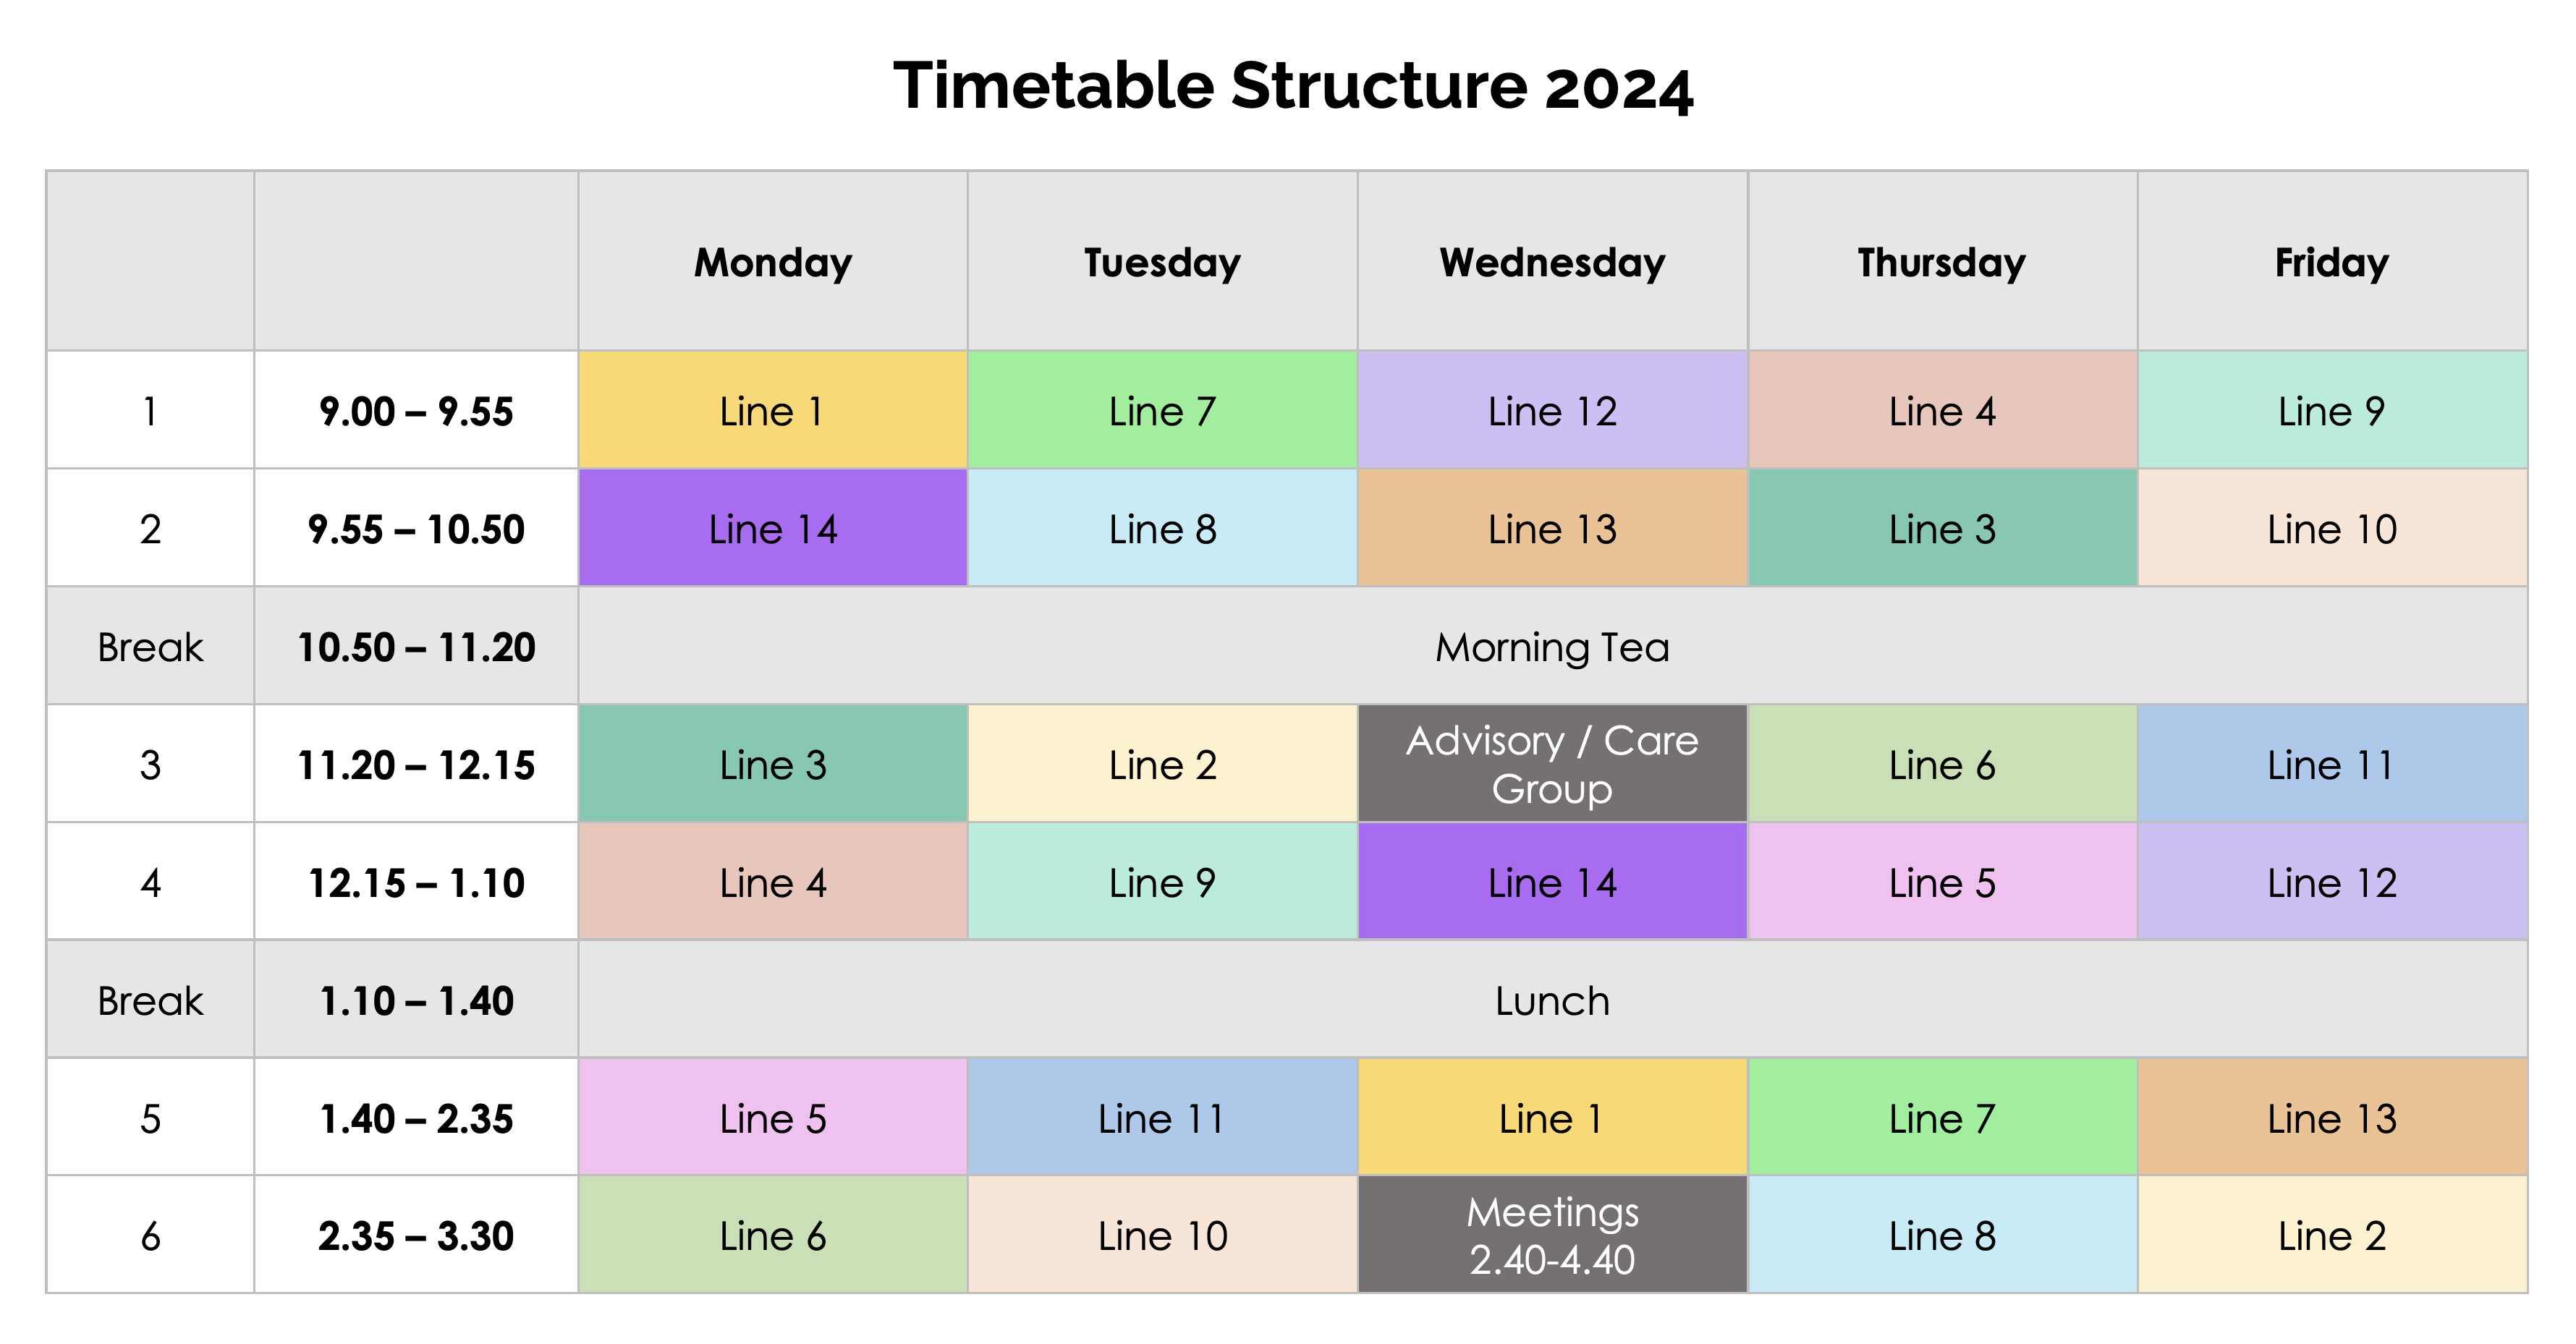 Timetable Structure 2024